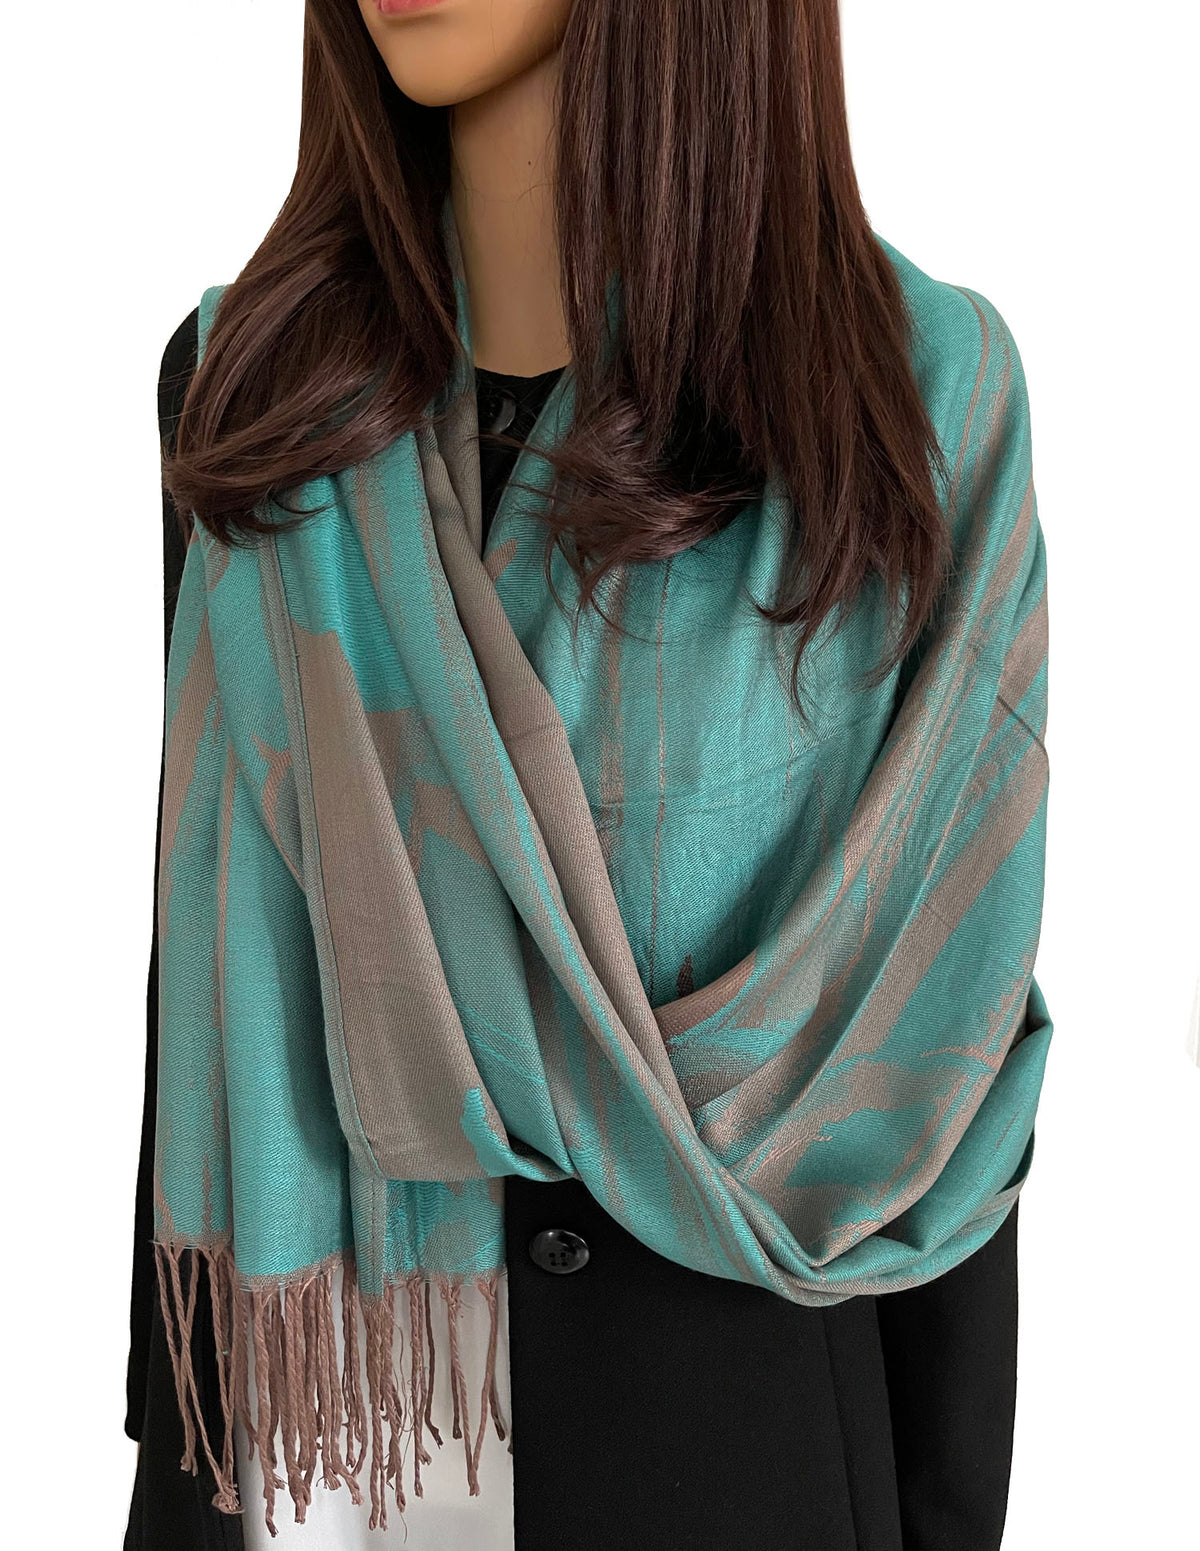 A-SHU TURQUOISE REVERSIBLE PASHMINA SCARF IN ABSTRACT FLORAL PRINT –